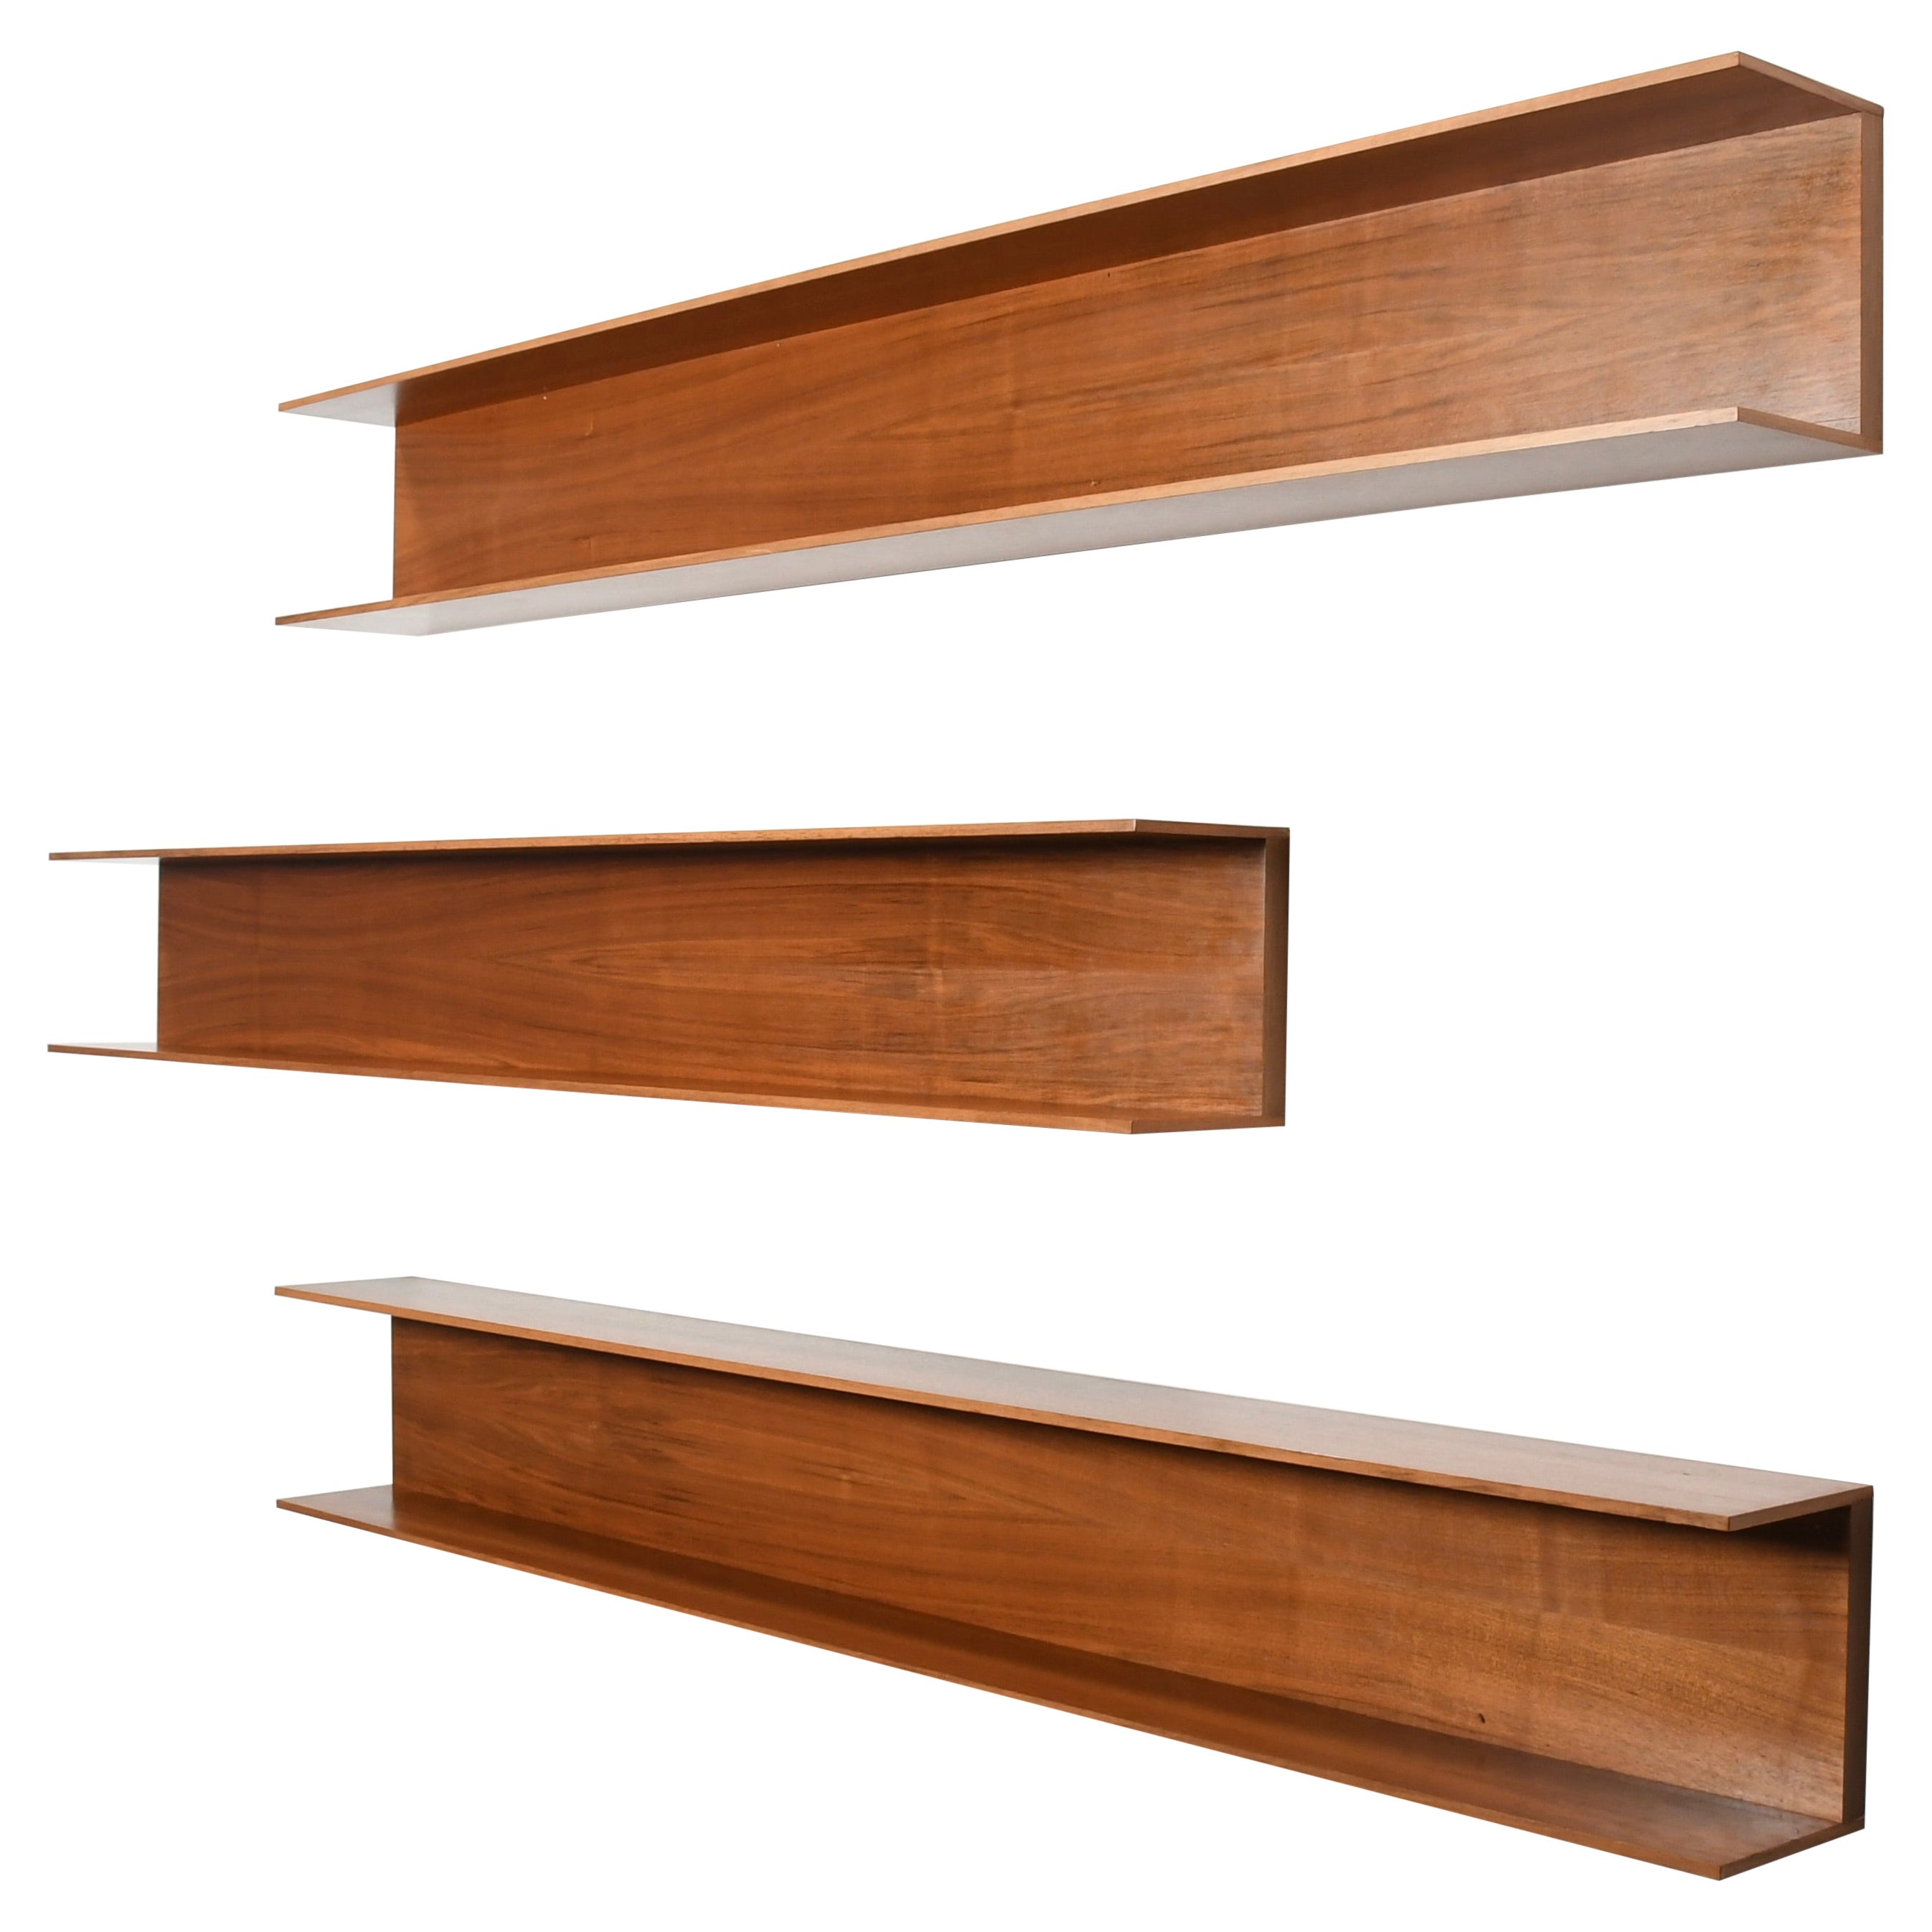 One of Three Large Teak Wall Shelves by Walter Wirz for Wilhelm Renz, 1960s